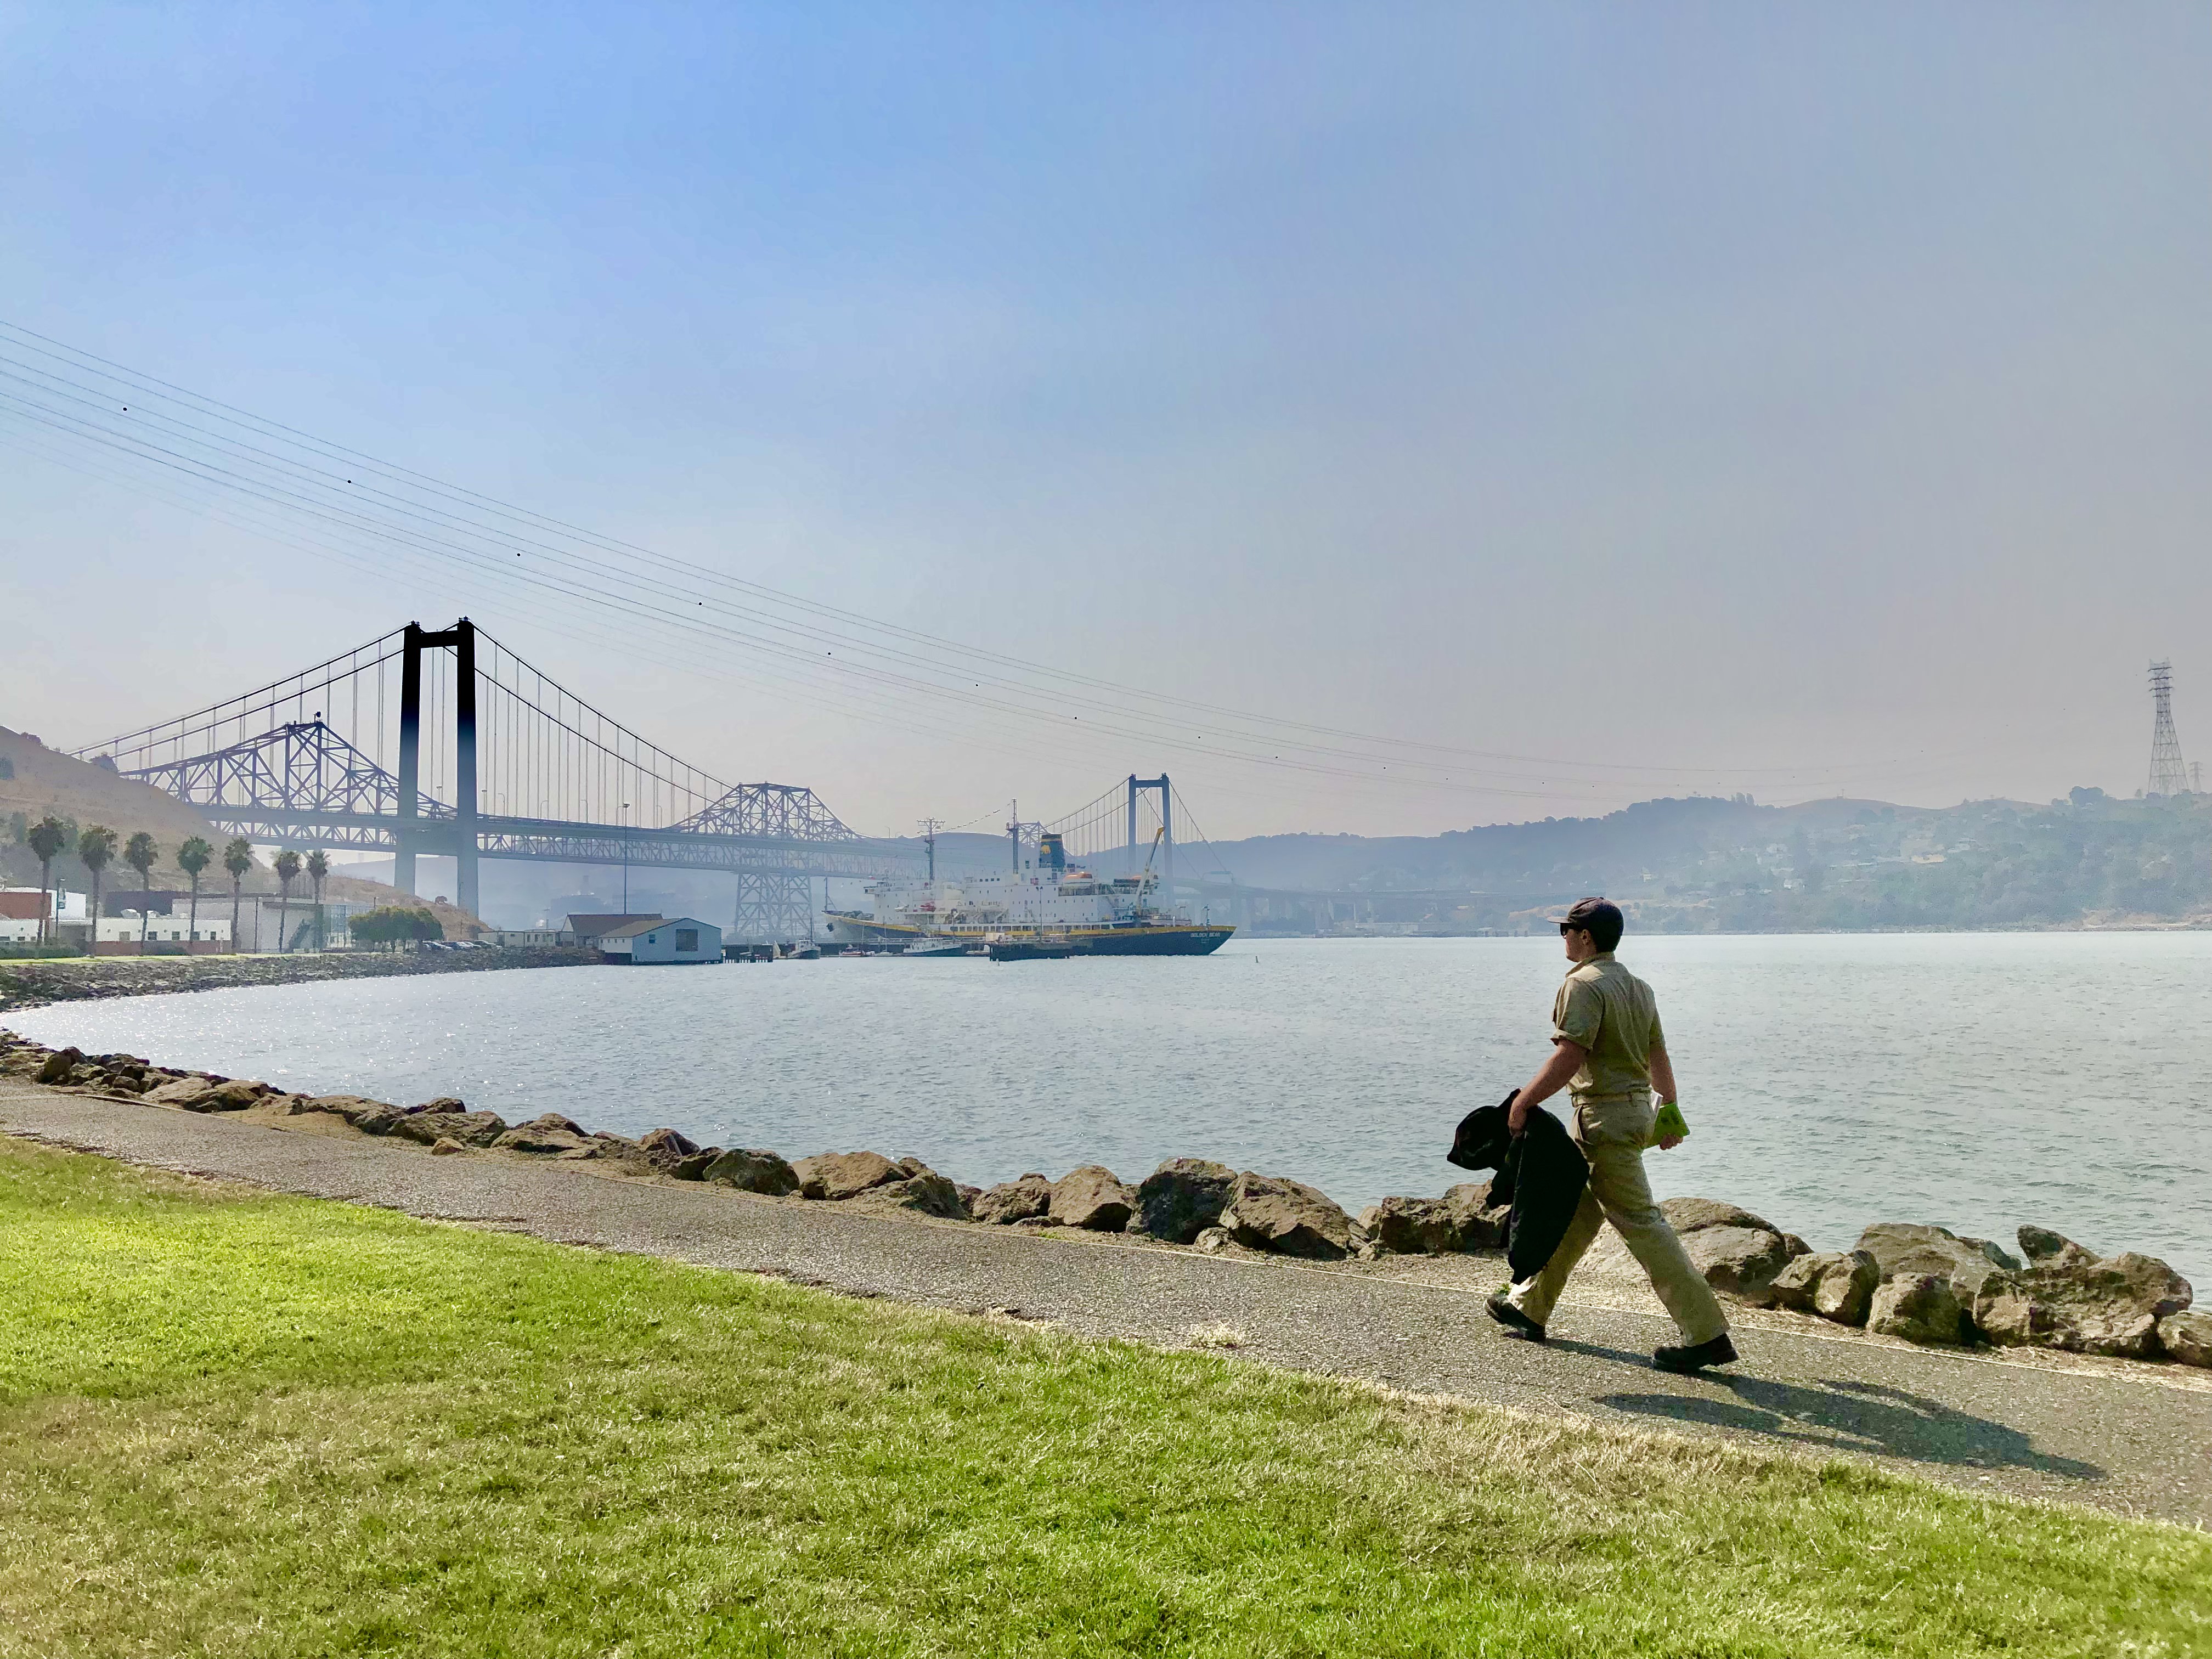 A Cadet in khakis walks along the Cal Maritime campus waterfront